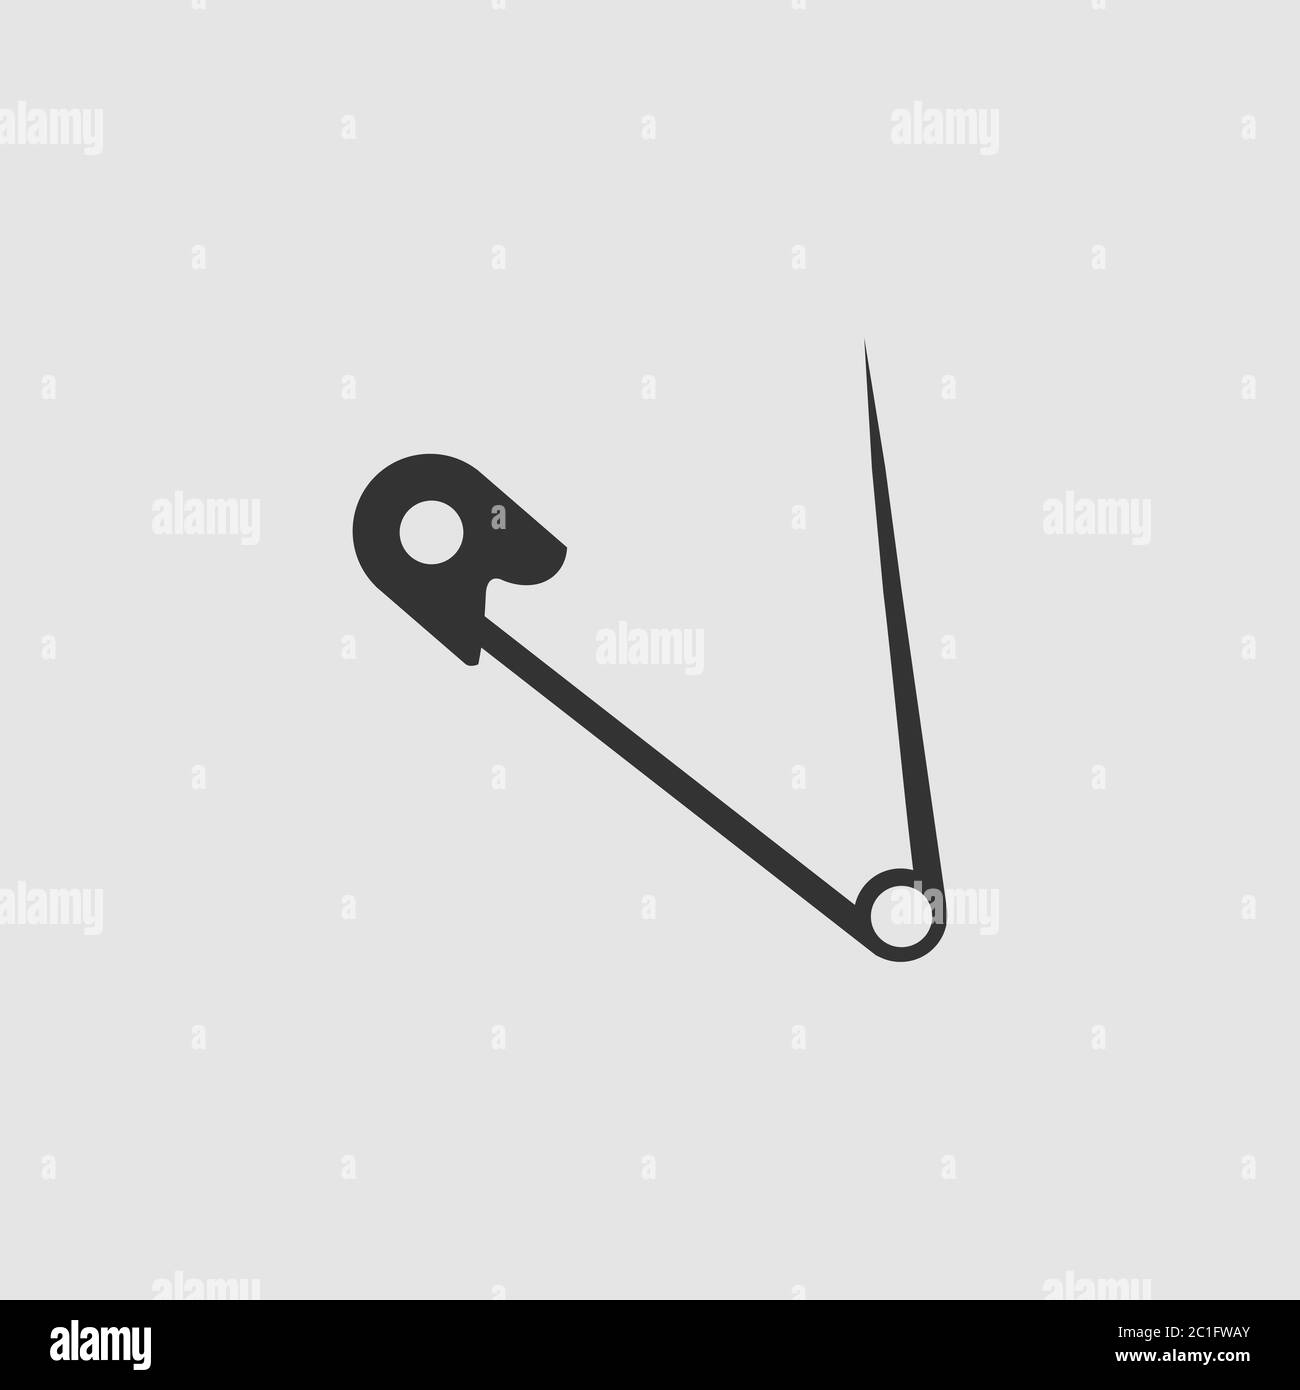 Safety pin icon flat. Black pictogram on grey background. Vector illustration symbol Stock Vector